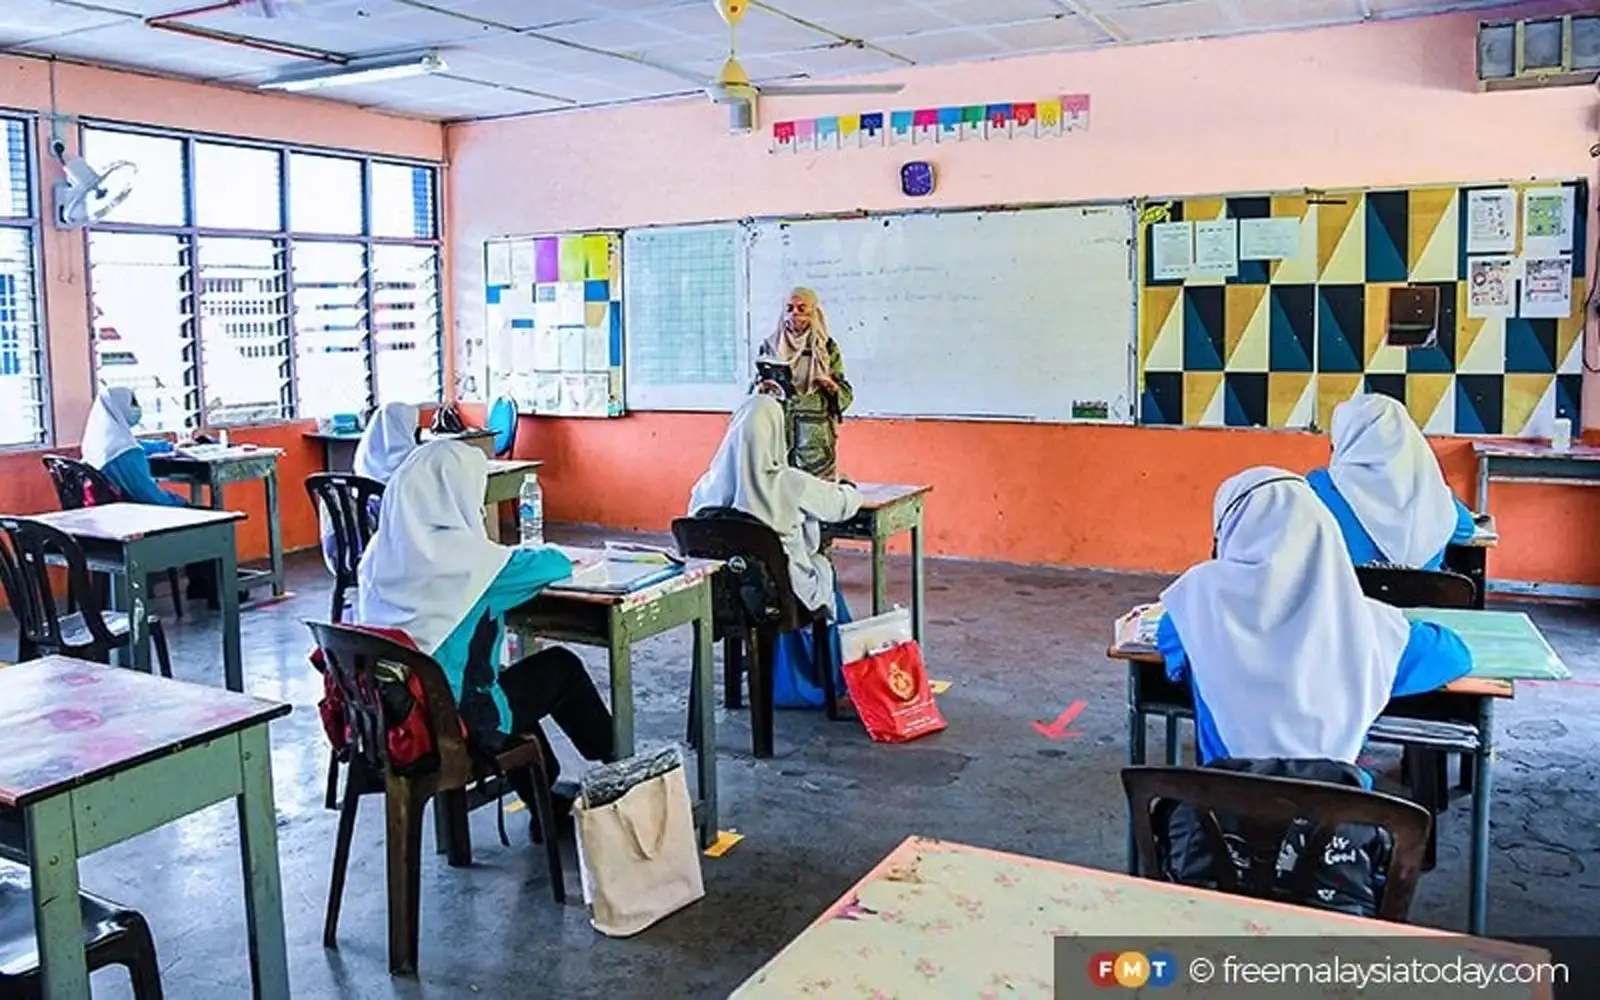 release spm results earlier, says union, citing school holidays